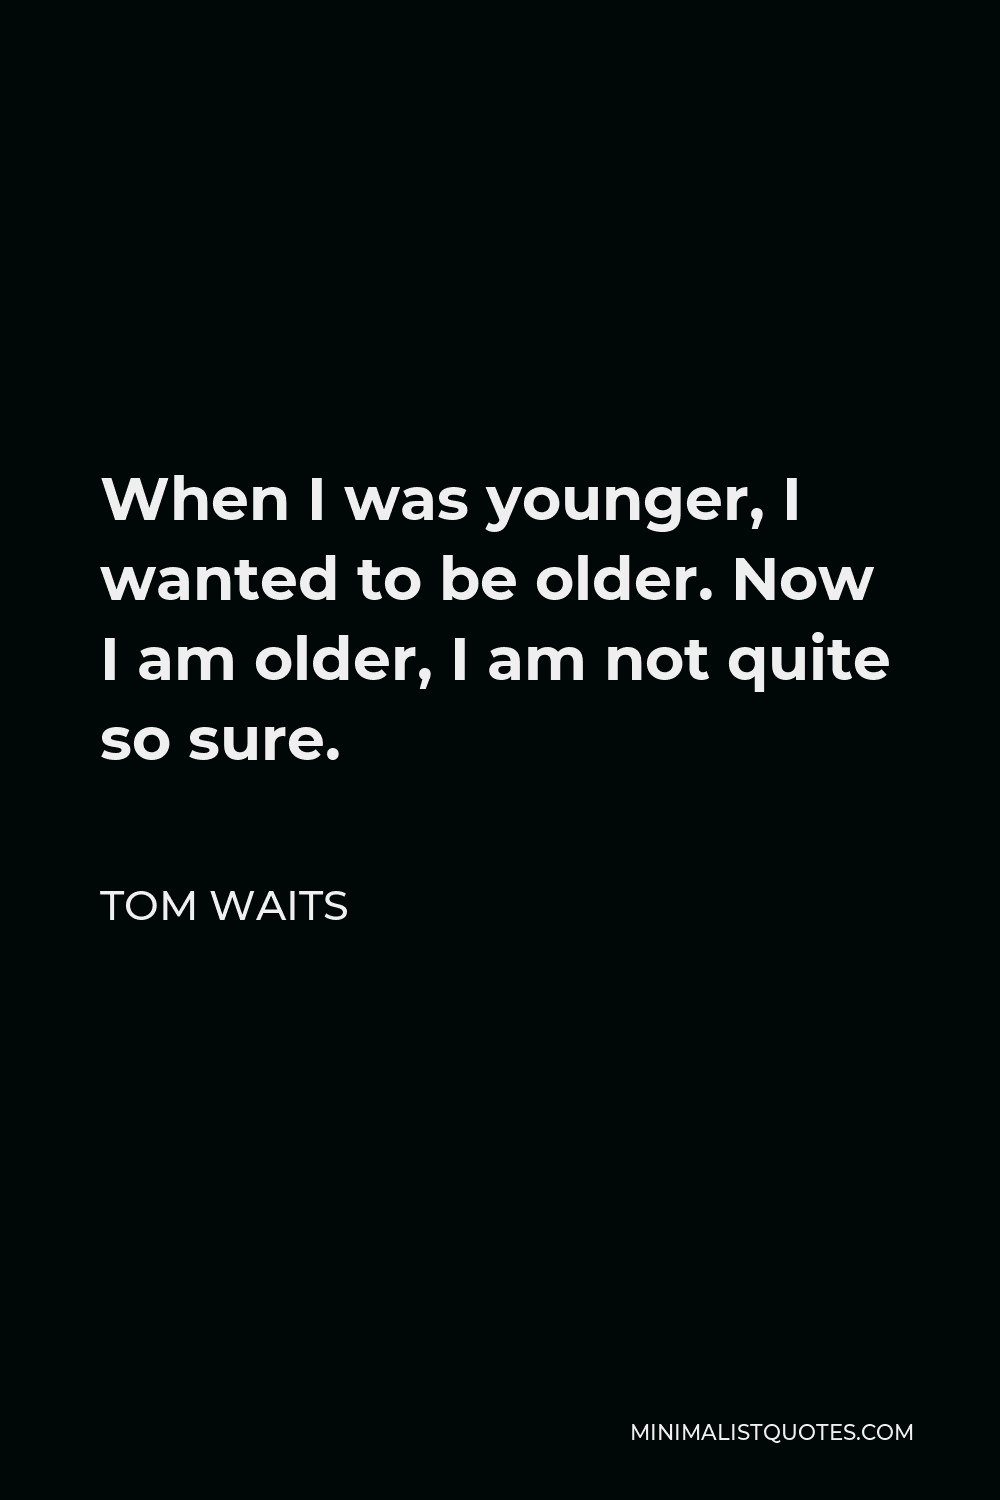 Tom Waits Quote - When I was younger, I wanted to be older. Now I am older, I am not quite so sure.